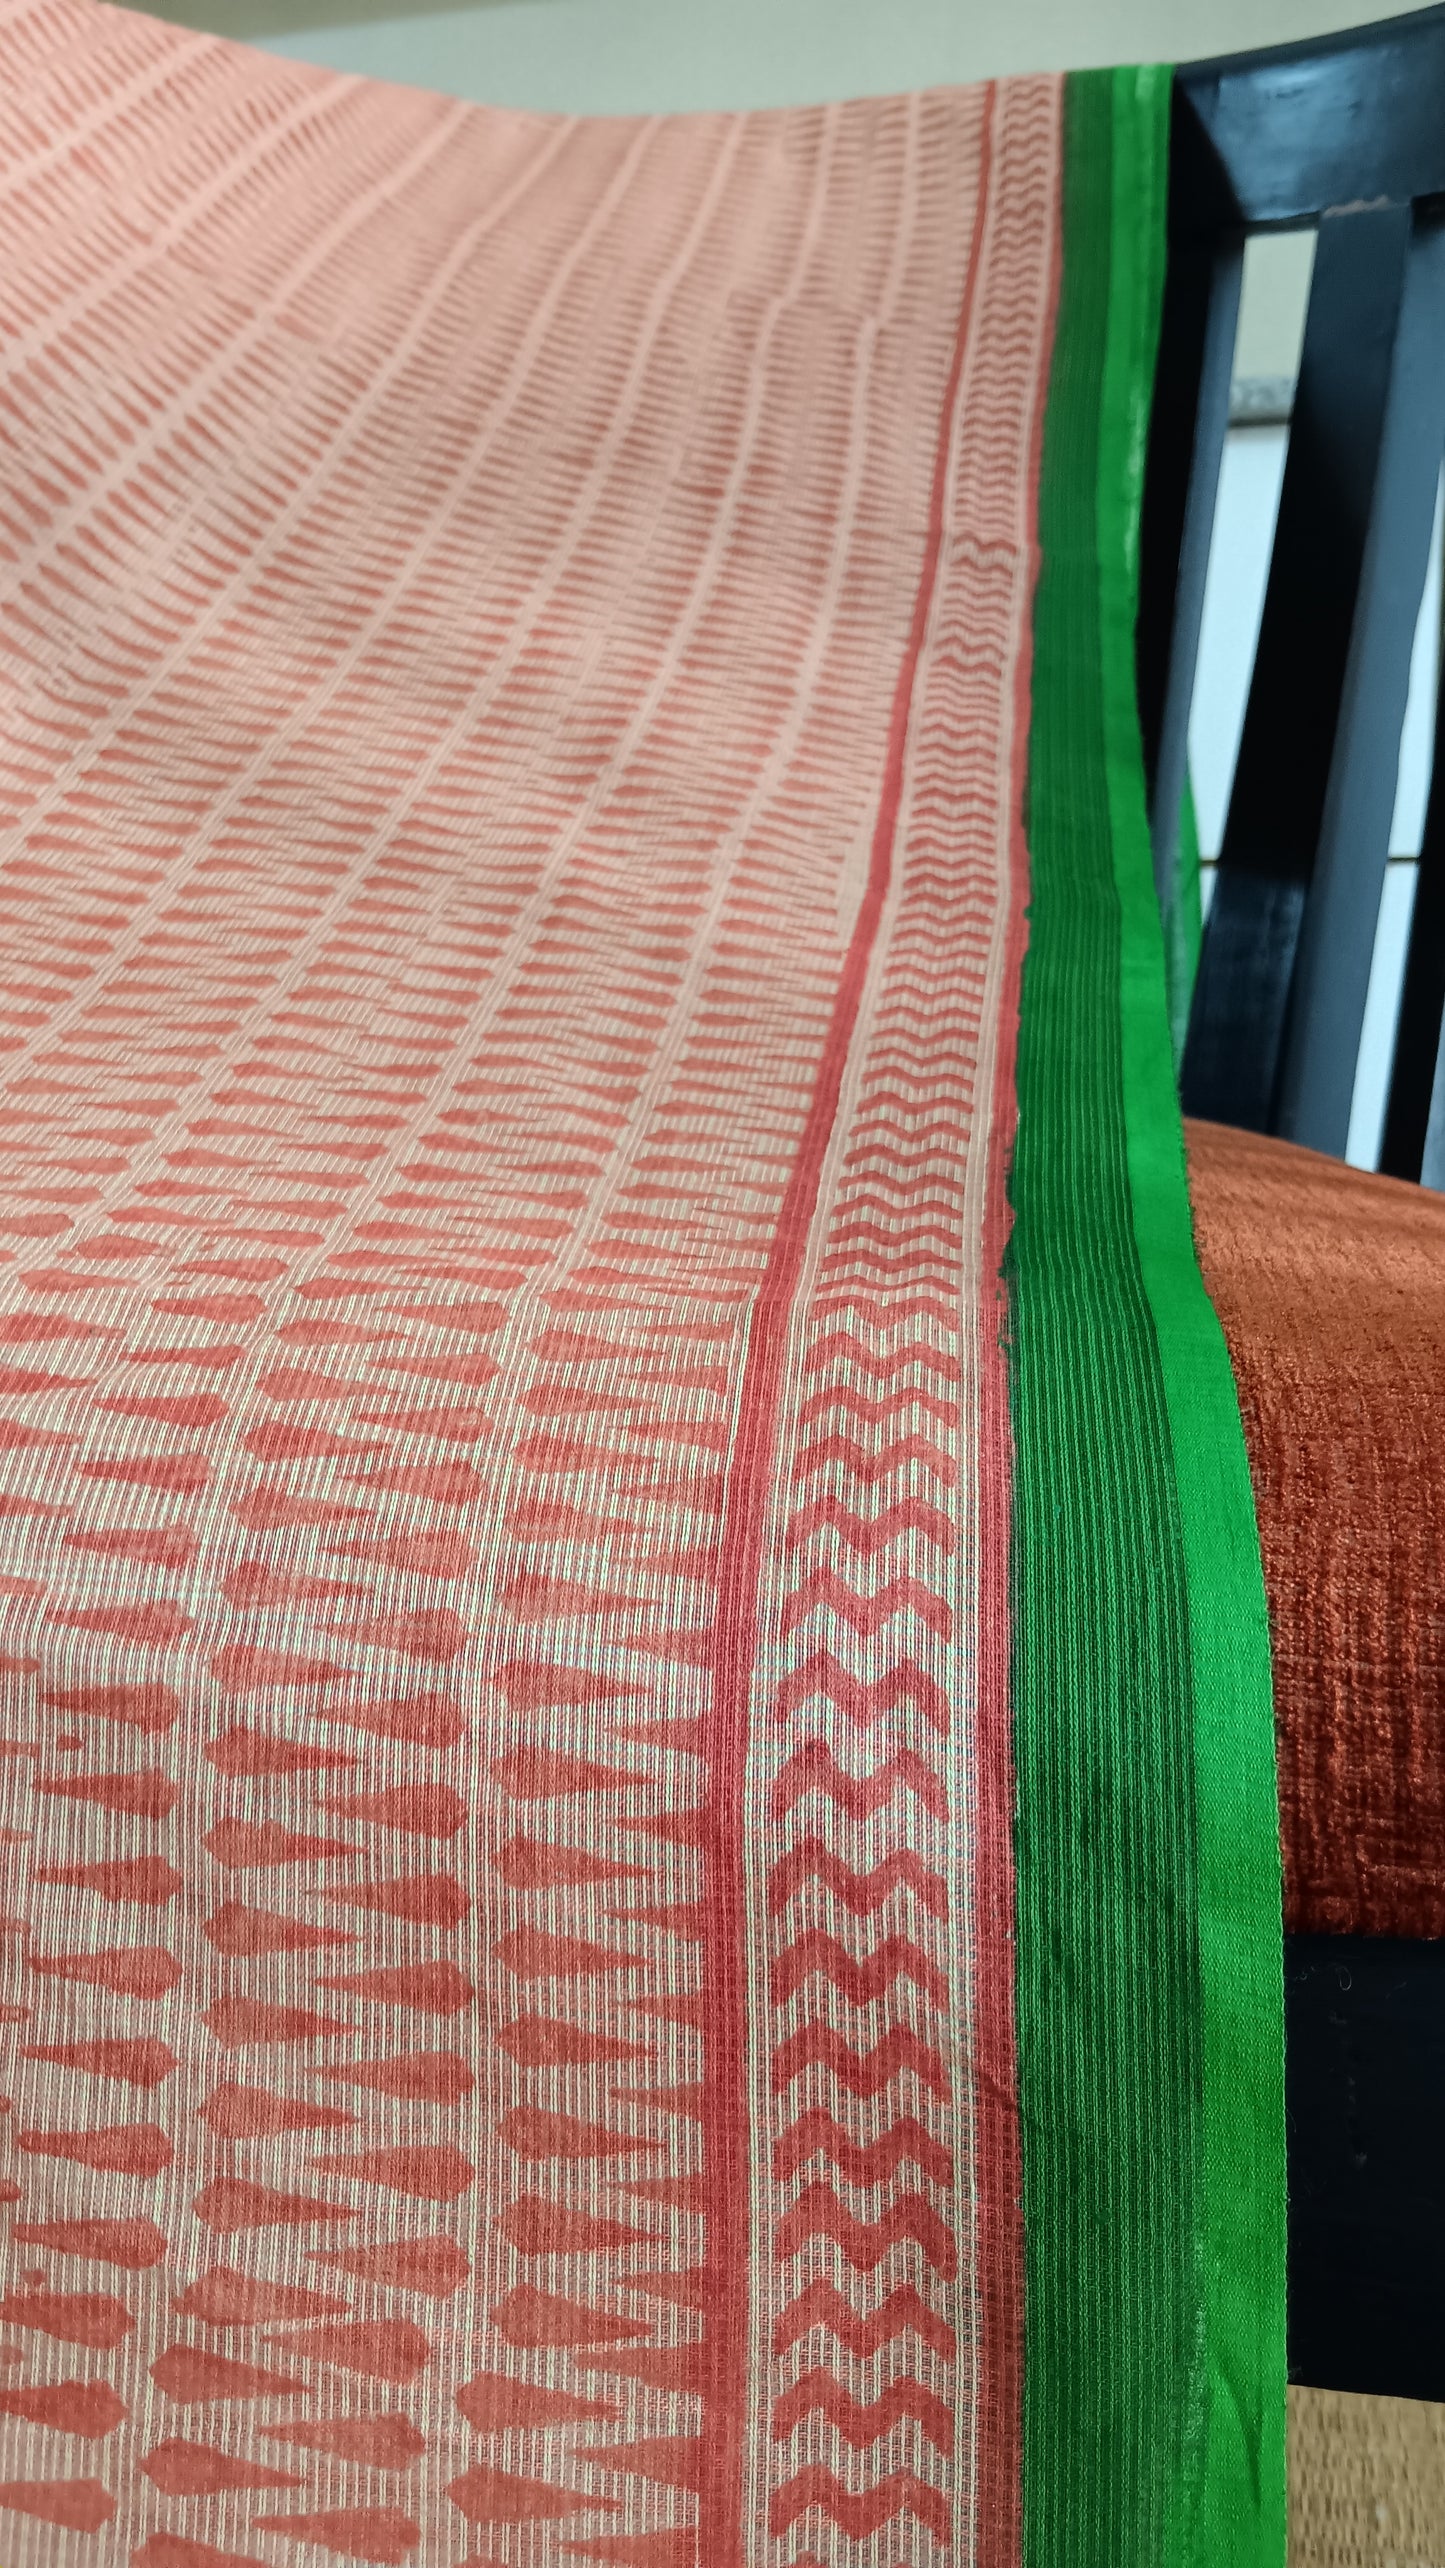 Close up view of the green border of a daily wear kota cotton saree